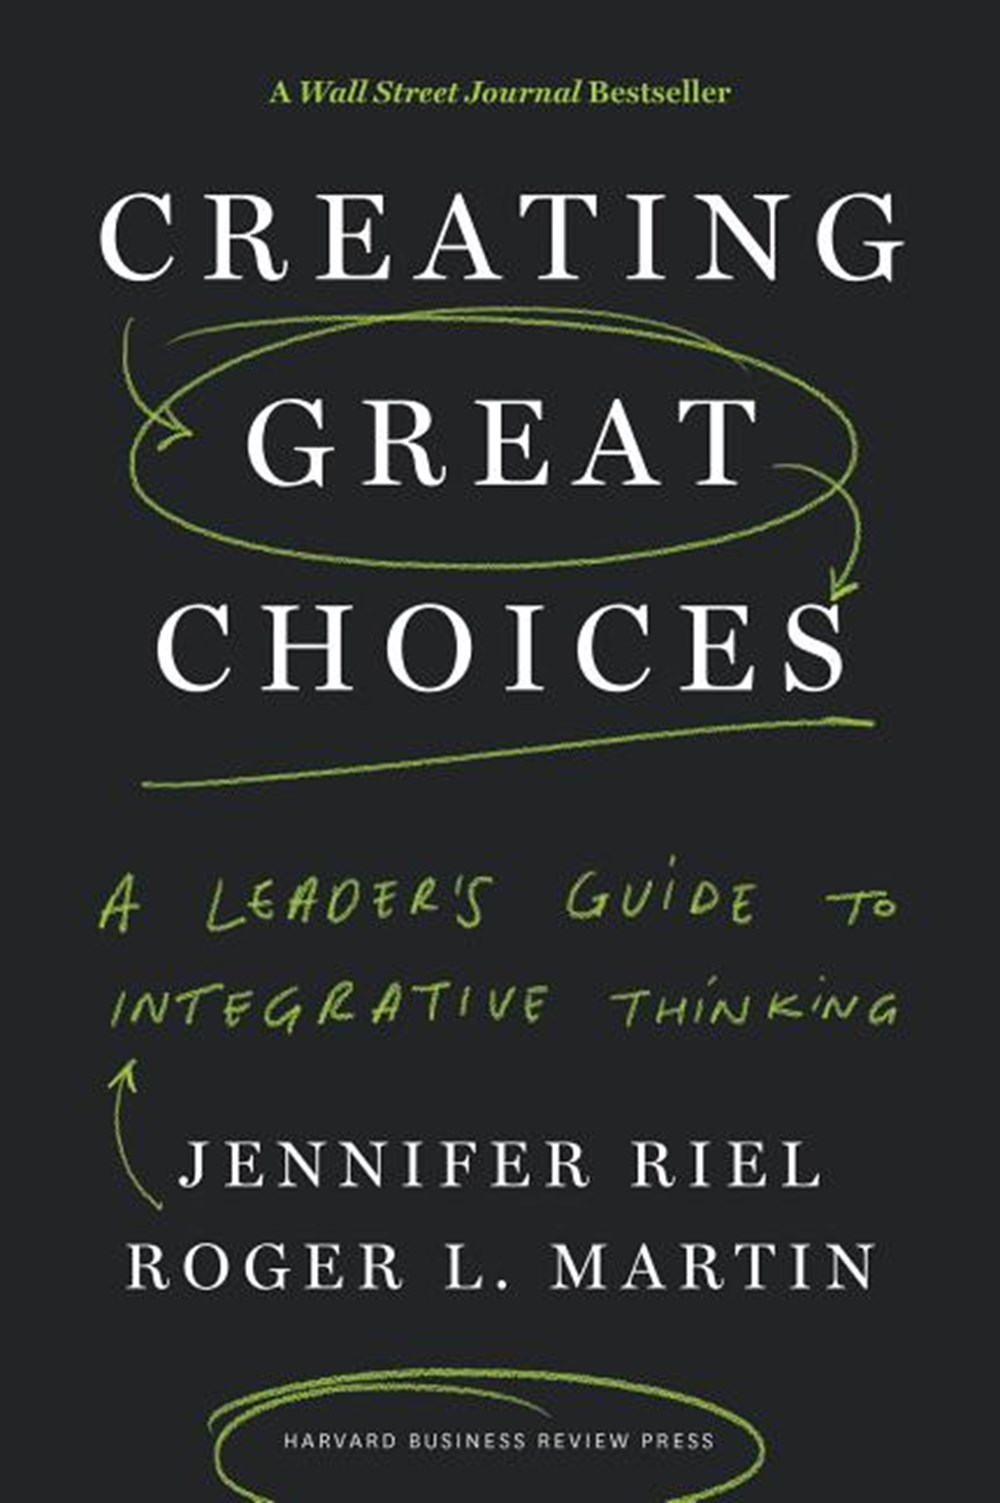 Creating Great Choices A Leader's Guide to Integrative Thinking